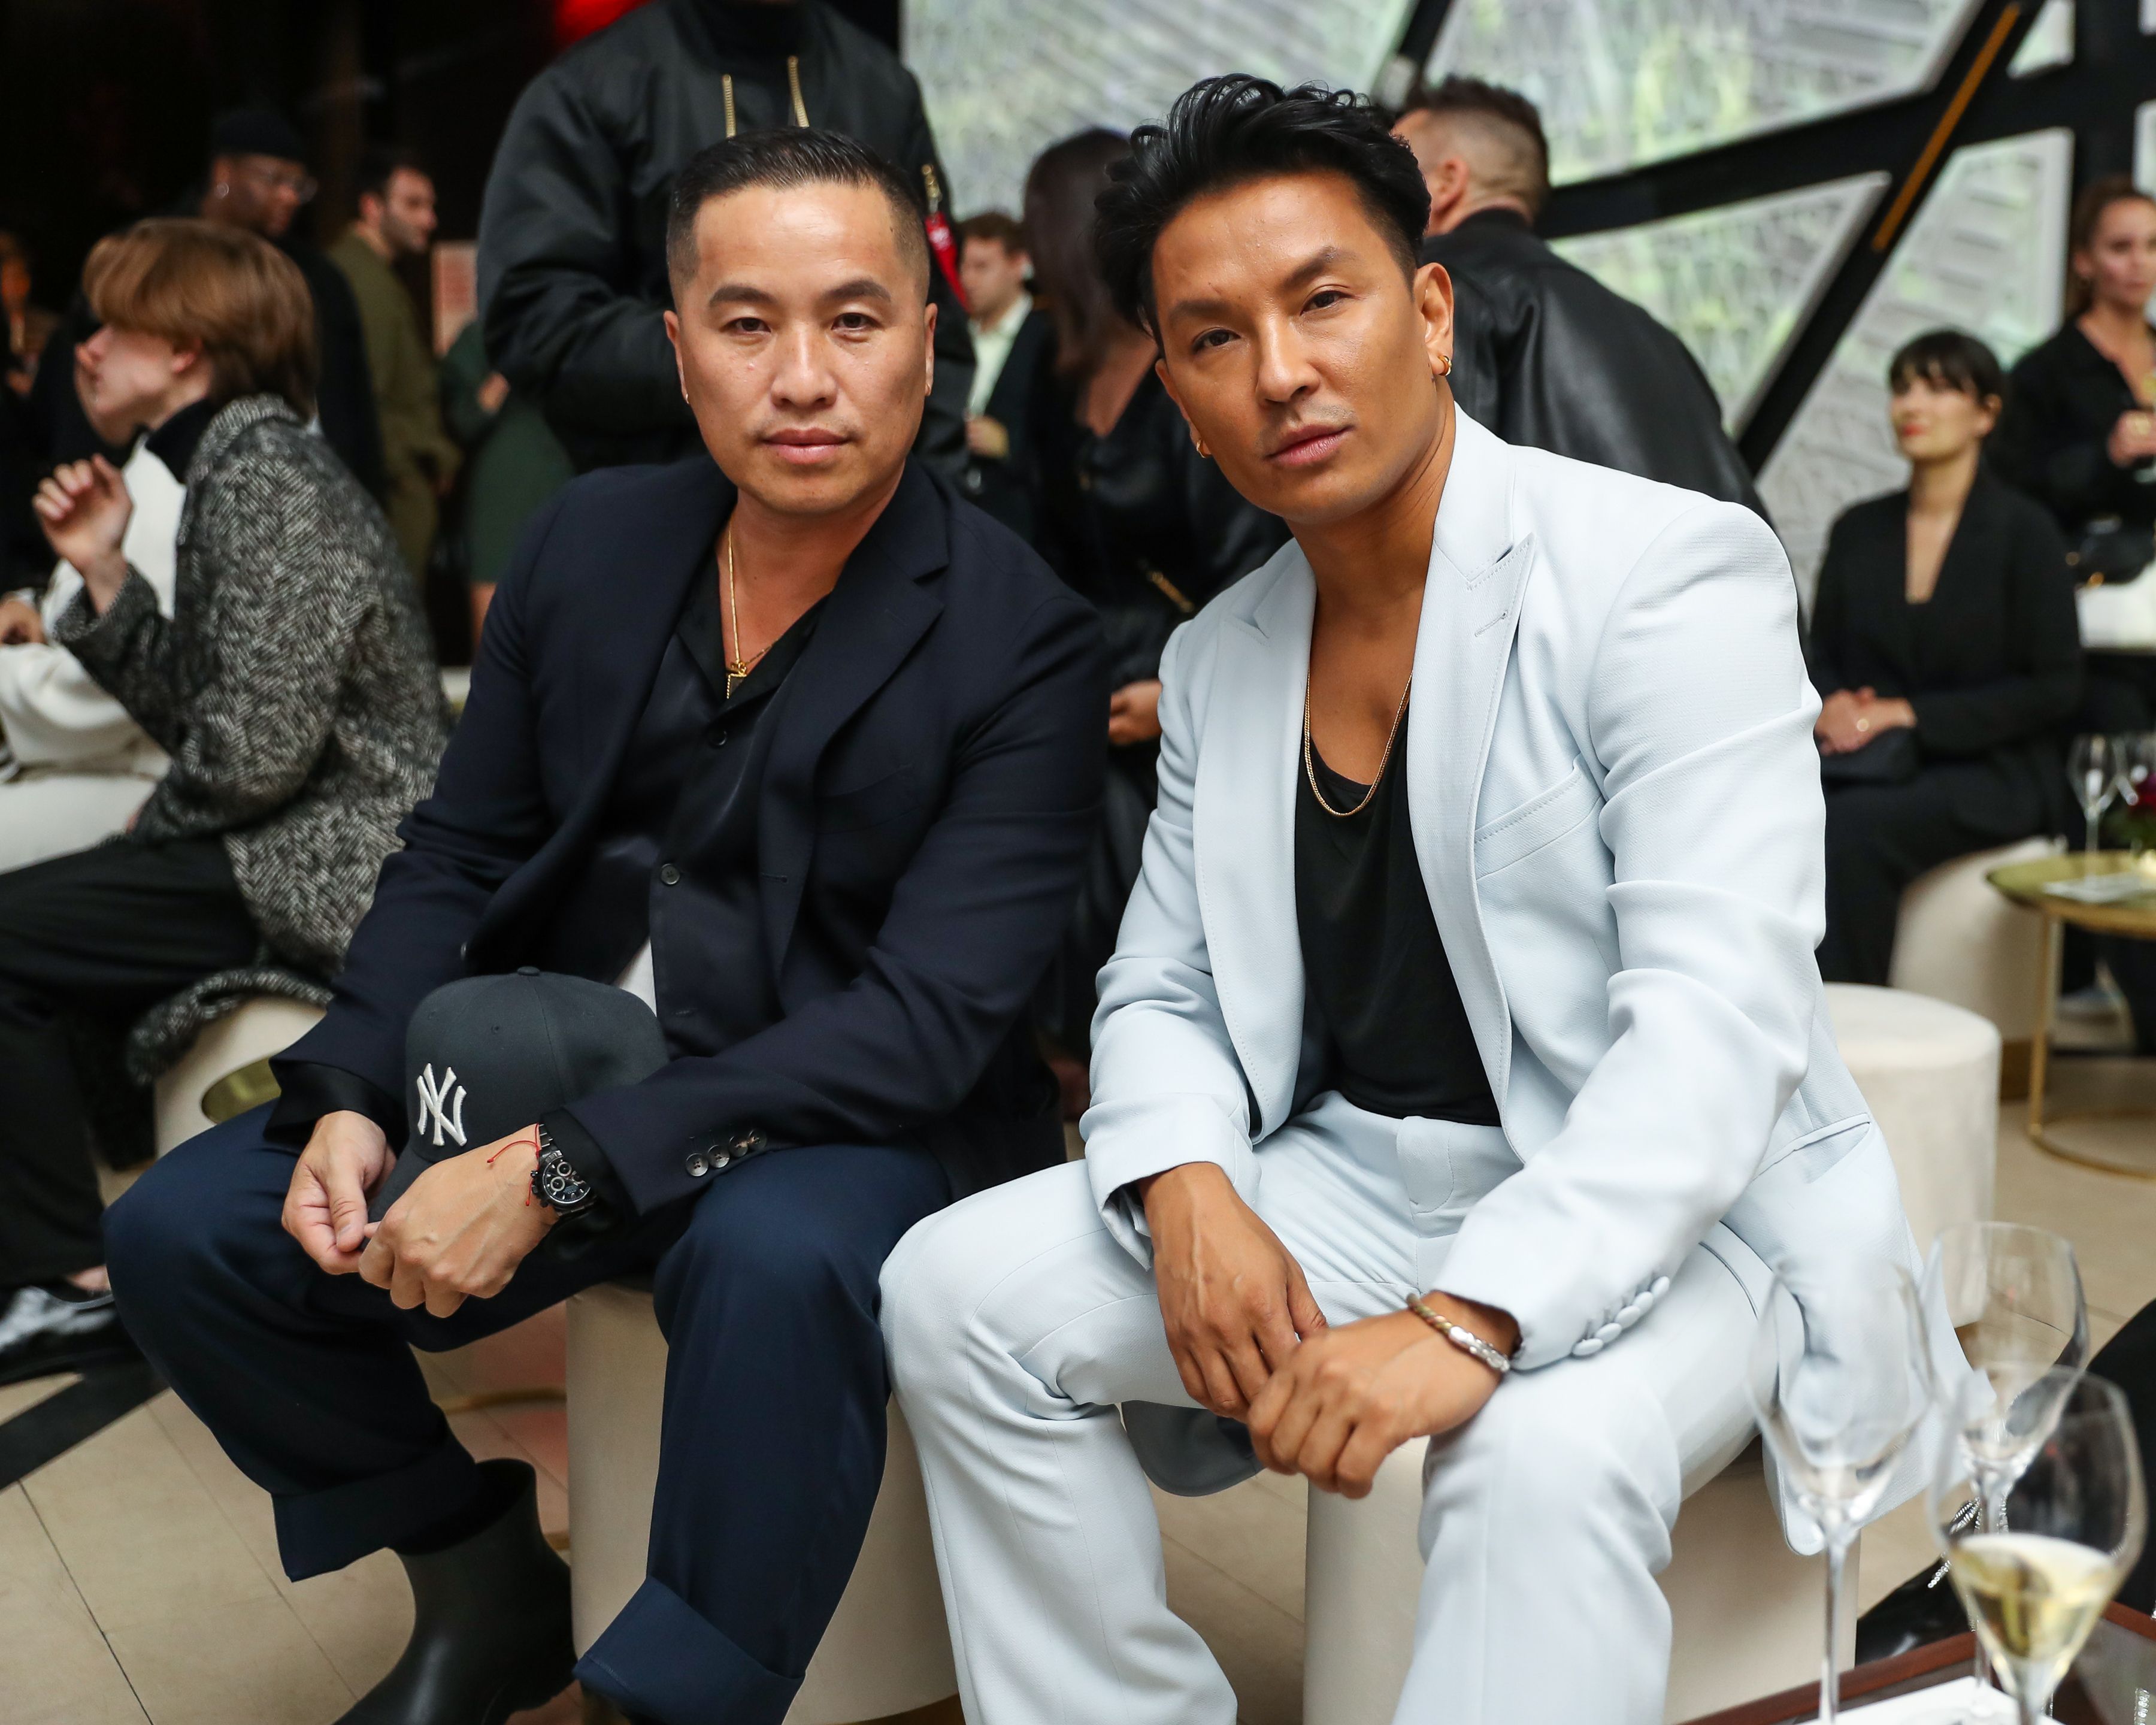 For Phillip Lim and Prabal Gurung, Hiding Behind Their Designs Is